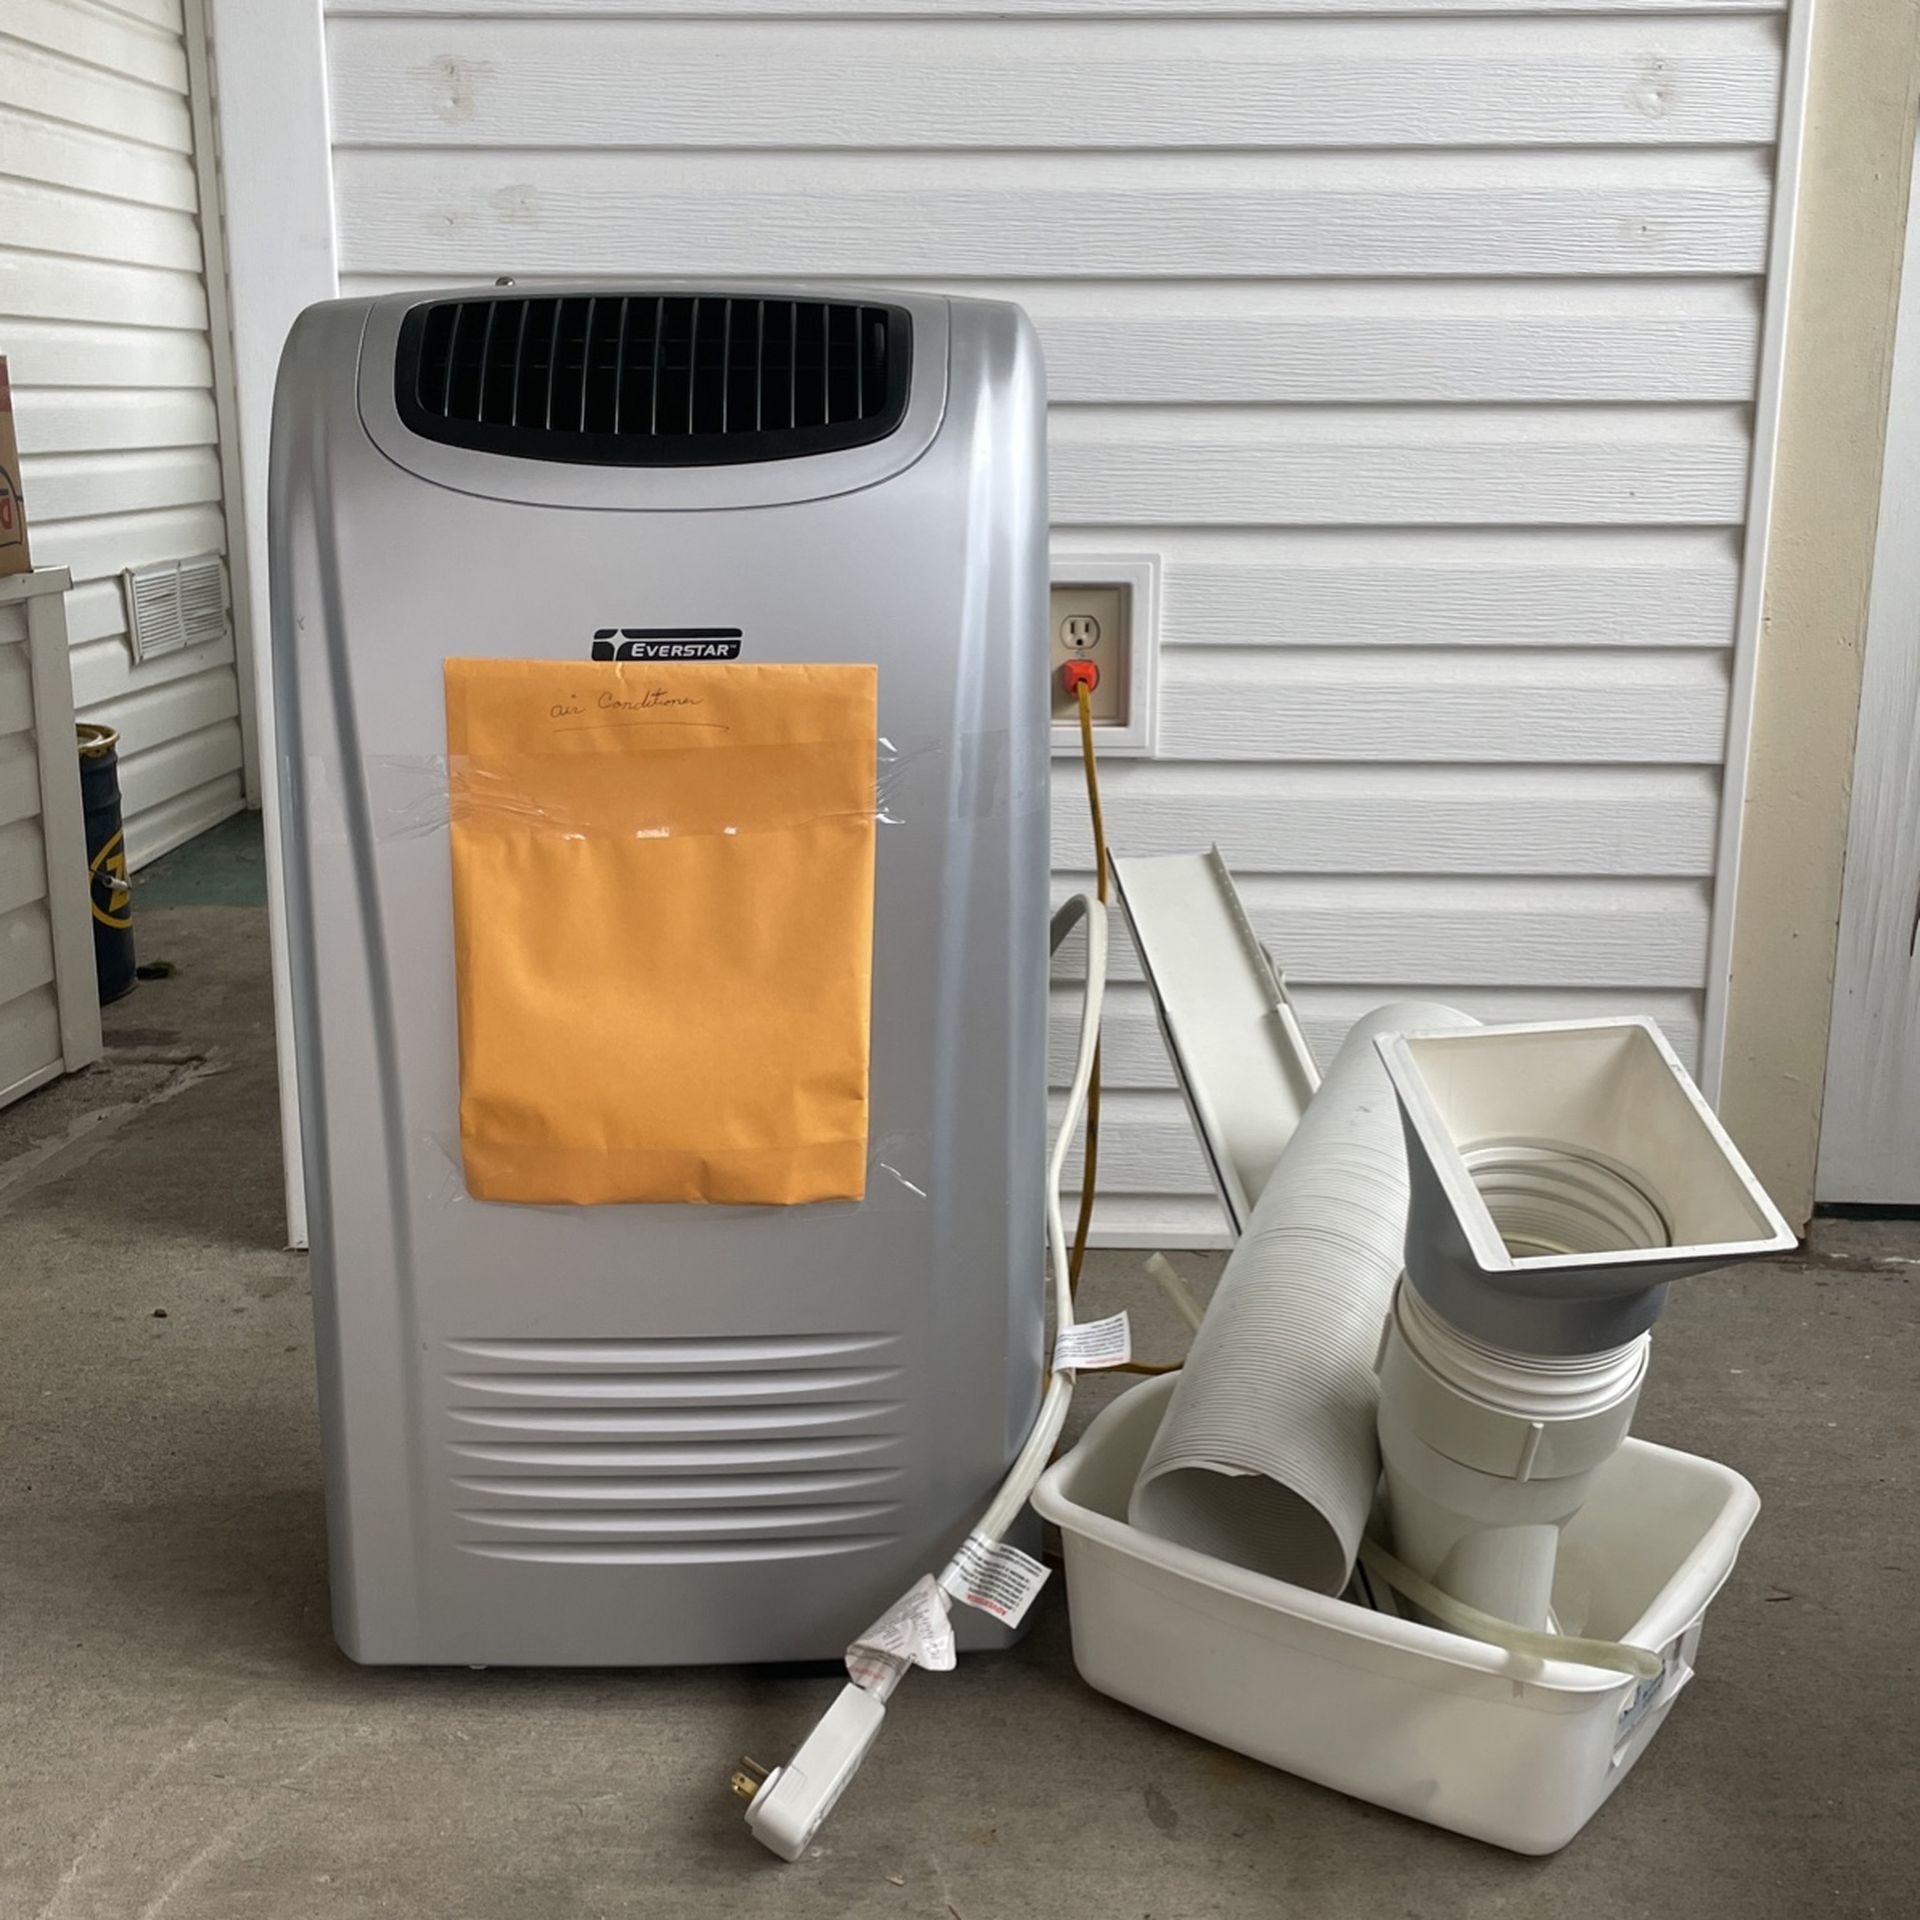 Everstar Portable air-conditioning